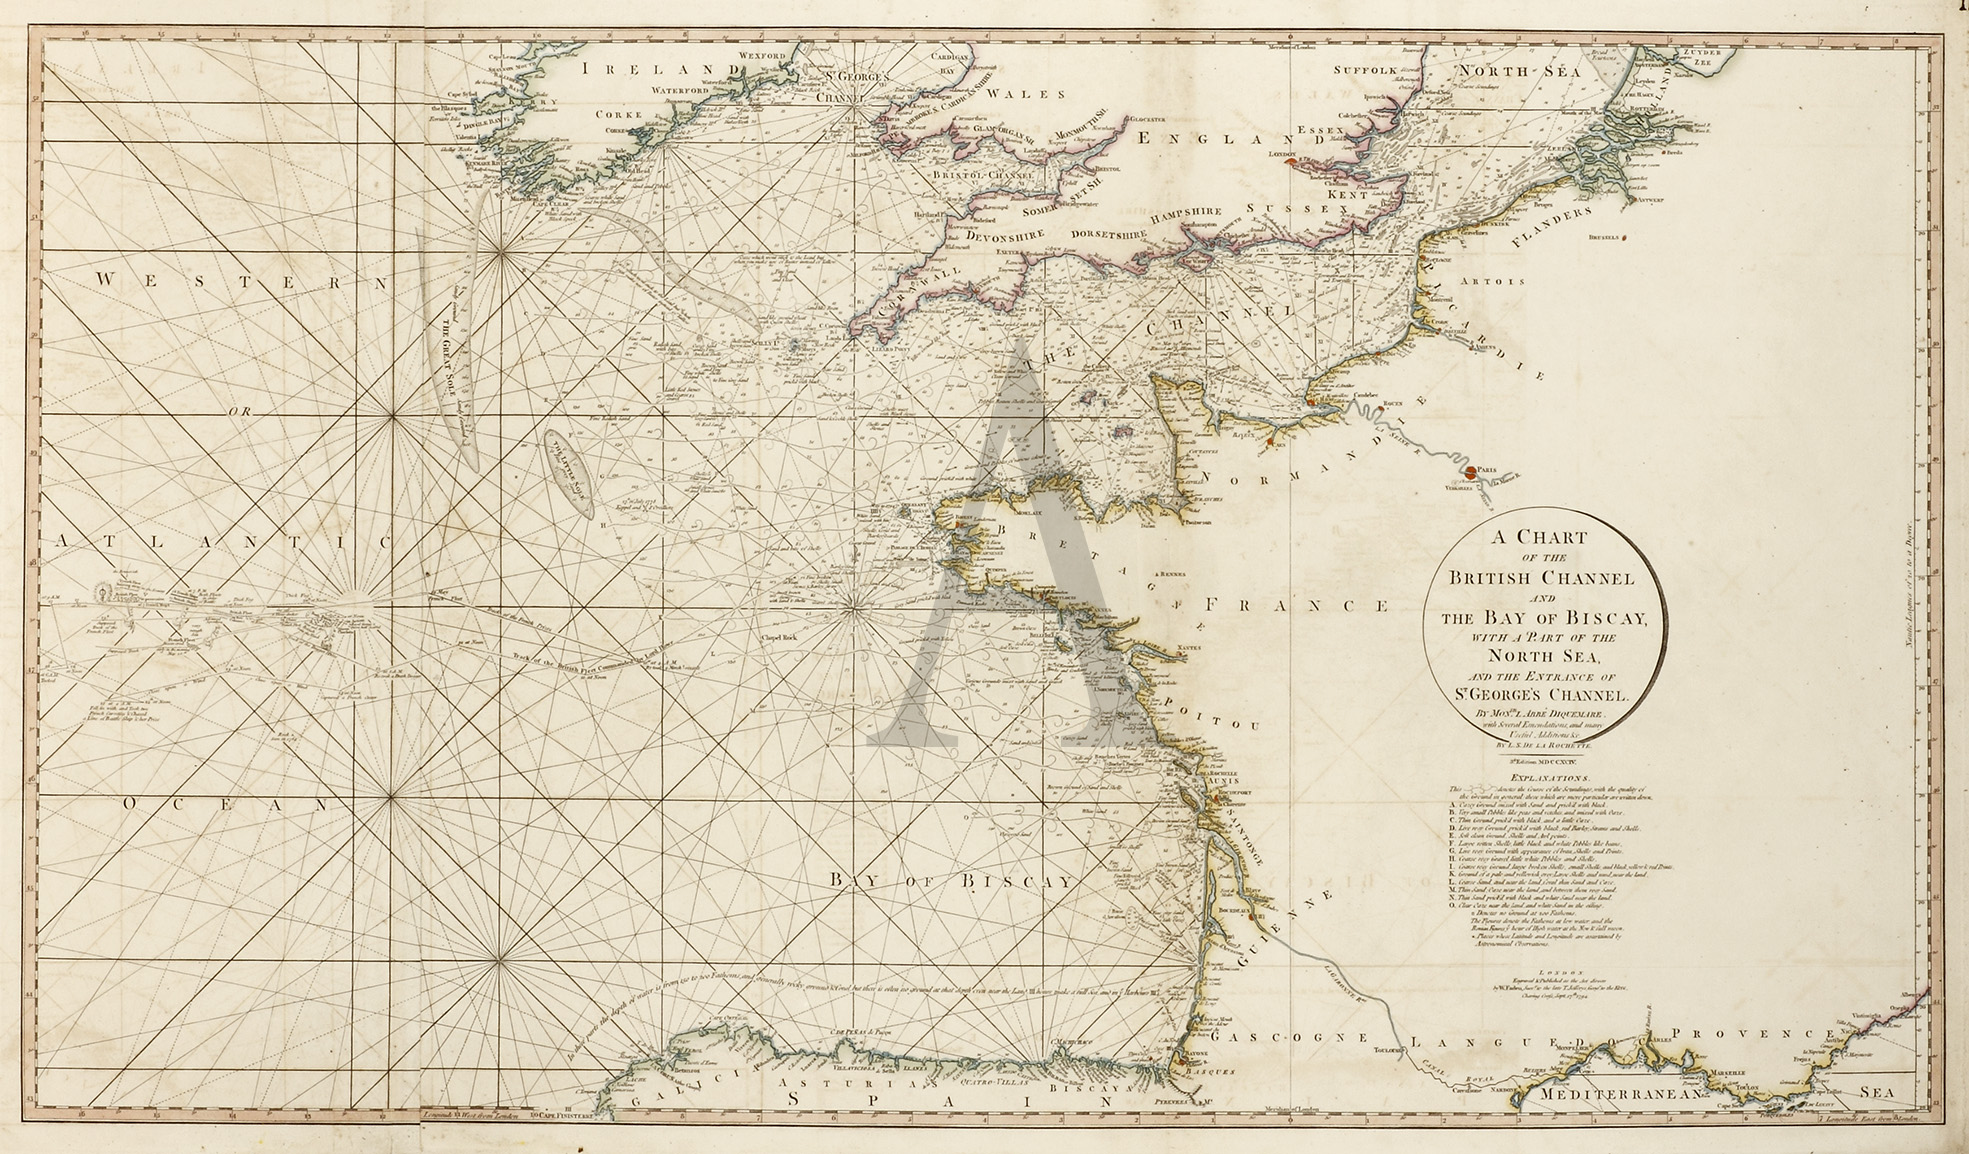 A Chart of the British Channel and the Bay of Biscay, with a Part of the North Sea, and the Entrance of St. George's Channel. - Antique Print from 1794